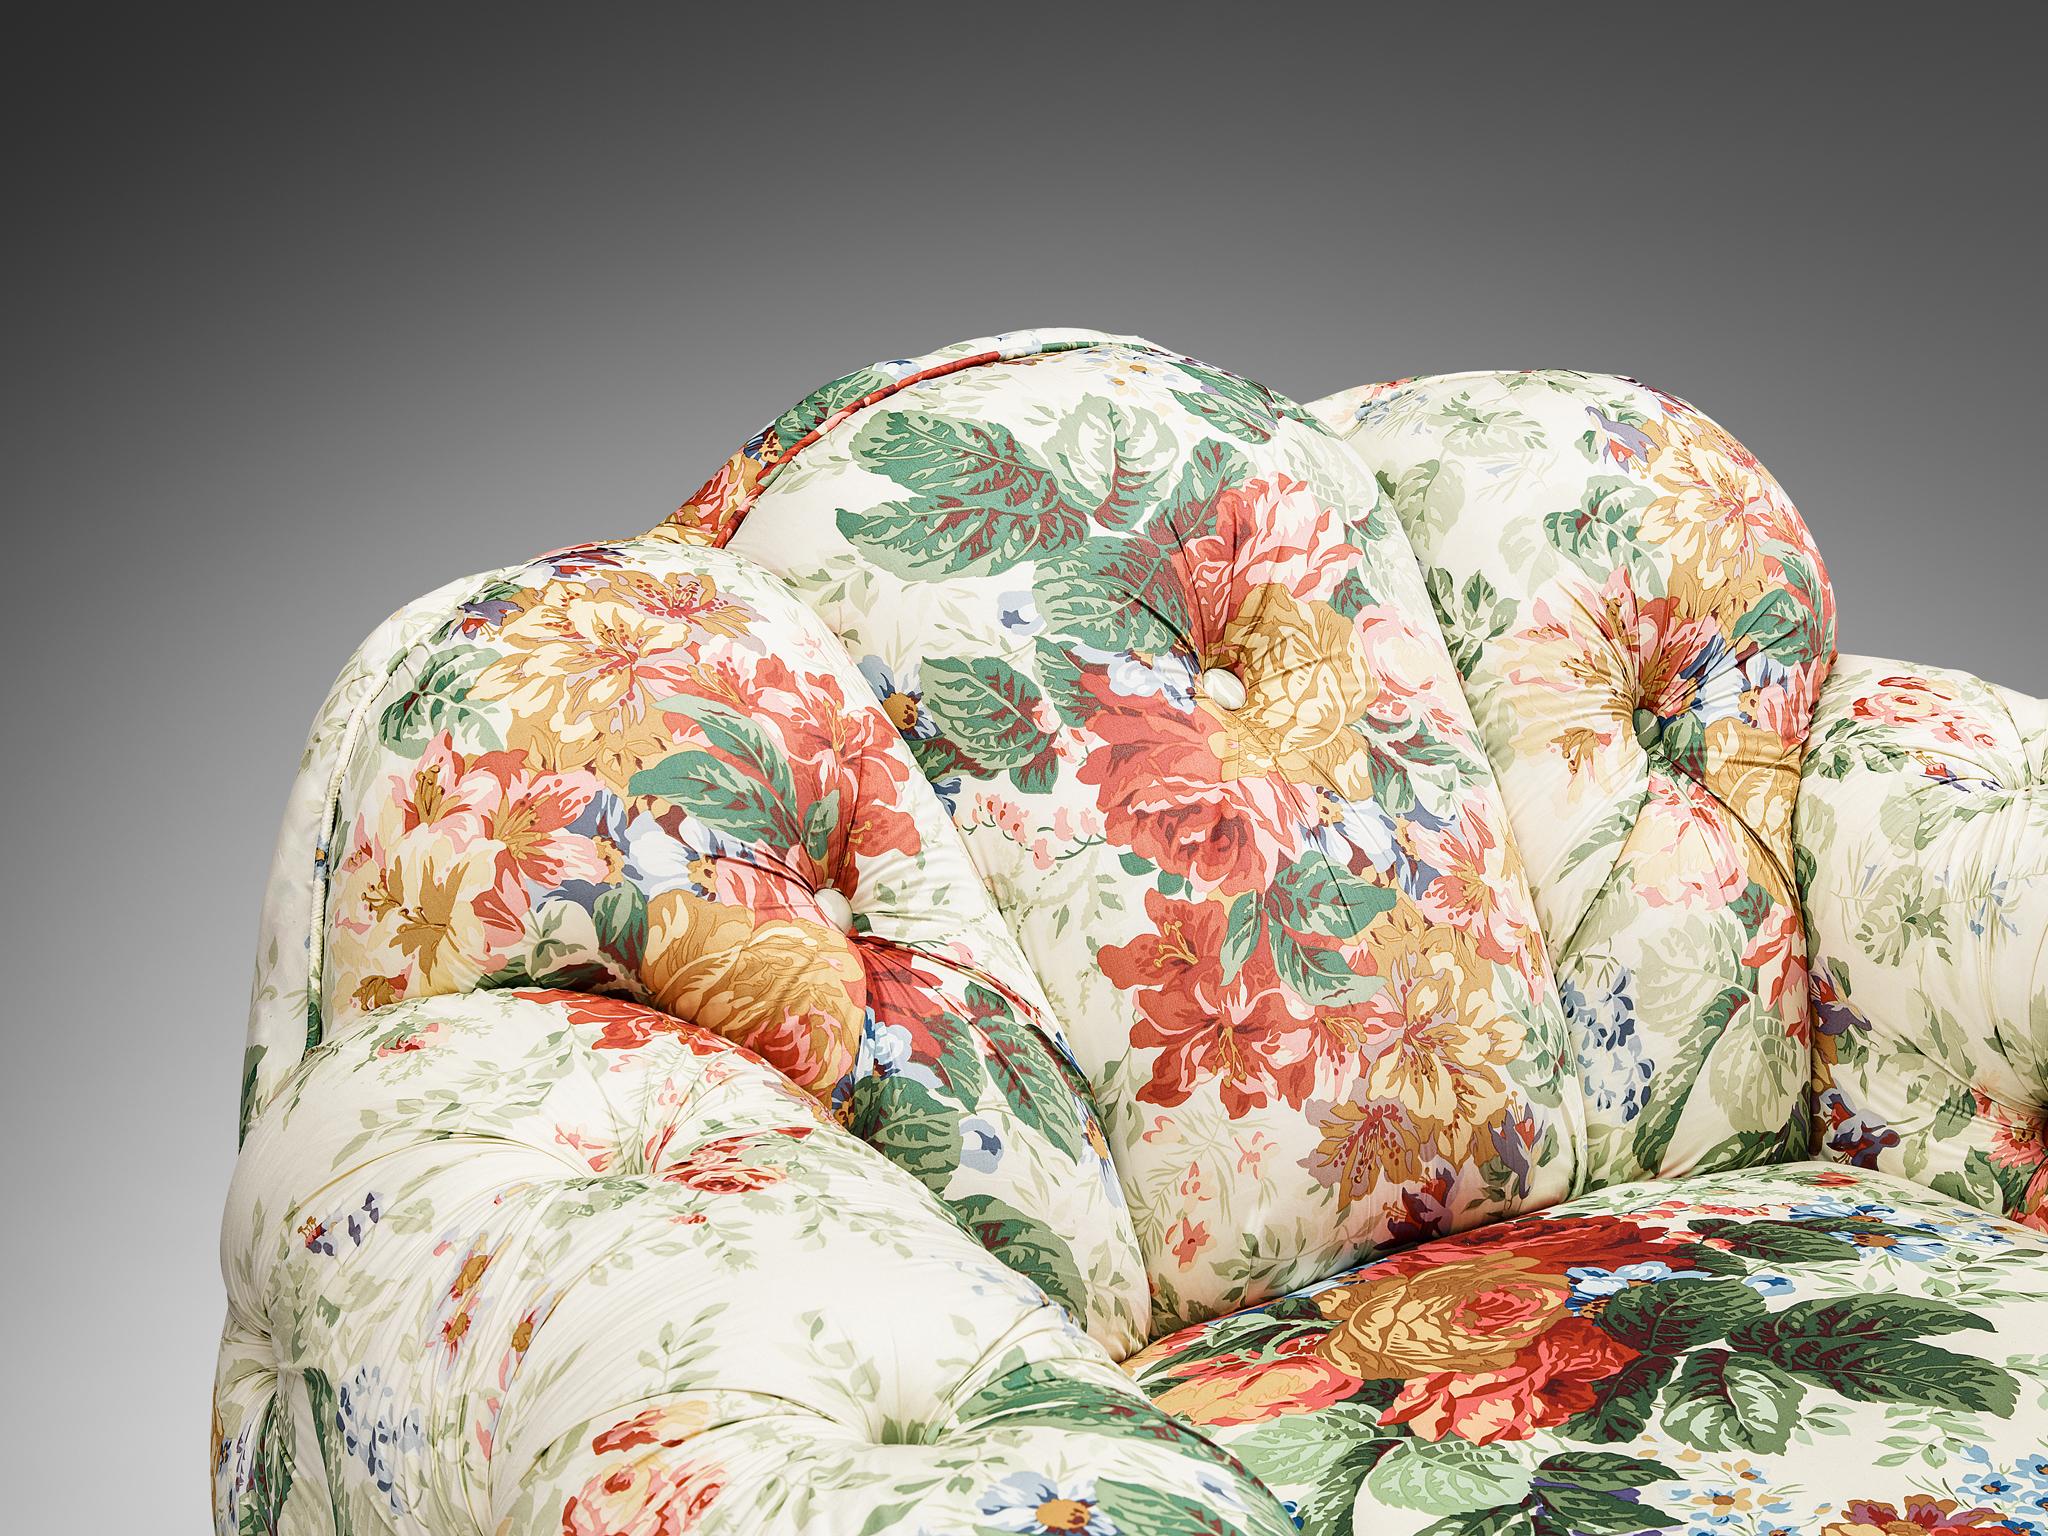 Vivai Del Sud 'Superstar' Lounge Chair in Floral Upholstery 2